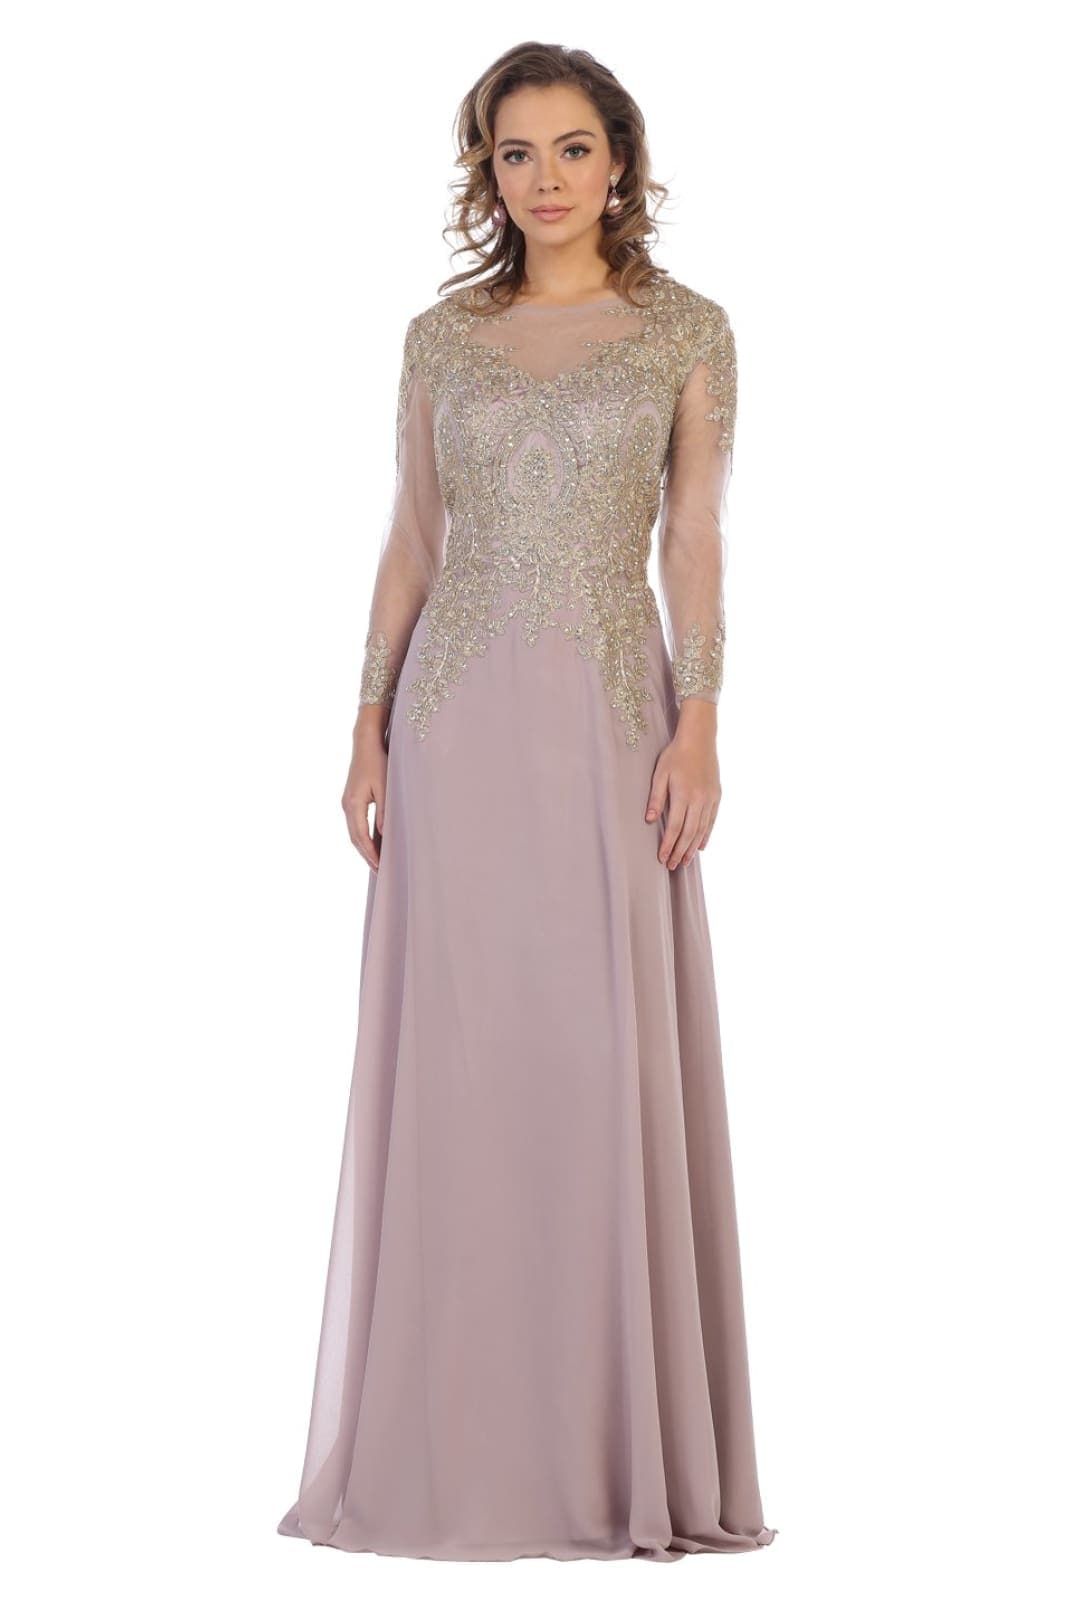 May Queen MQ1549 Modern Mother of the Bride Dress - MAUVE/GOLD / S